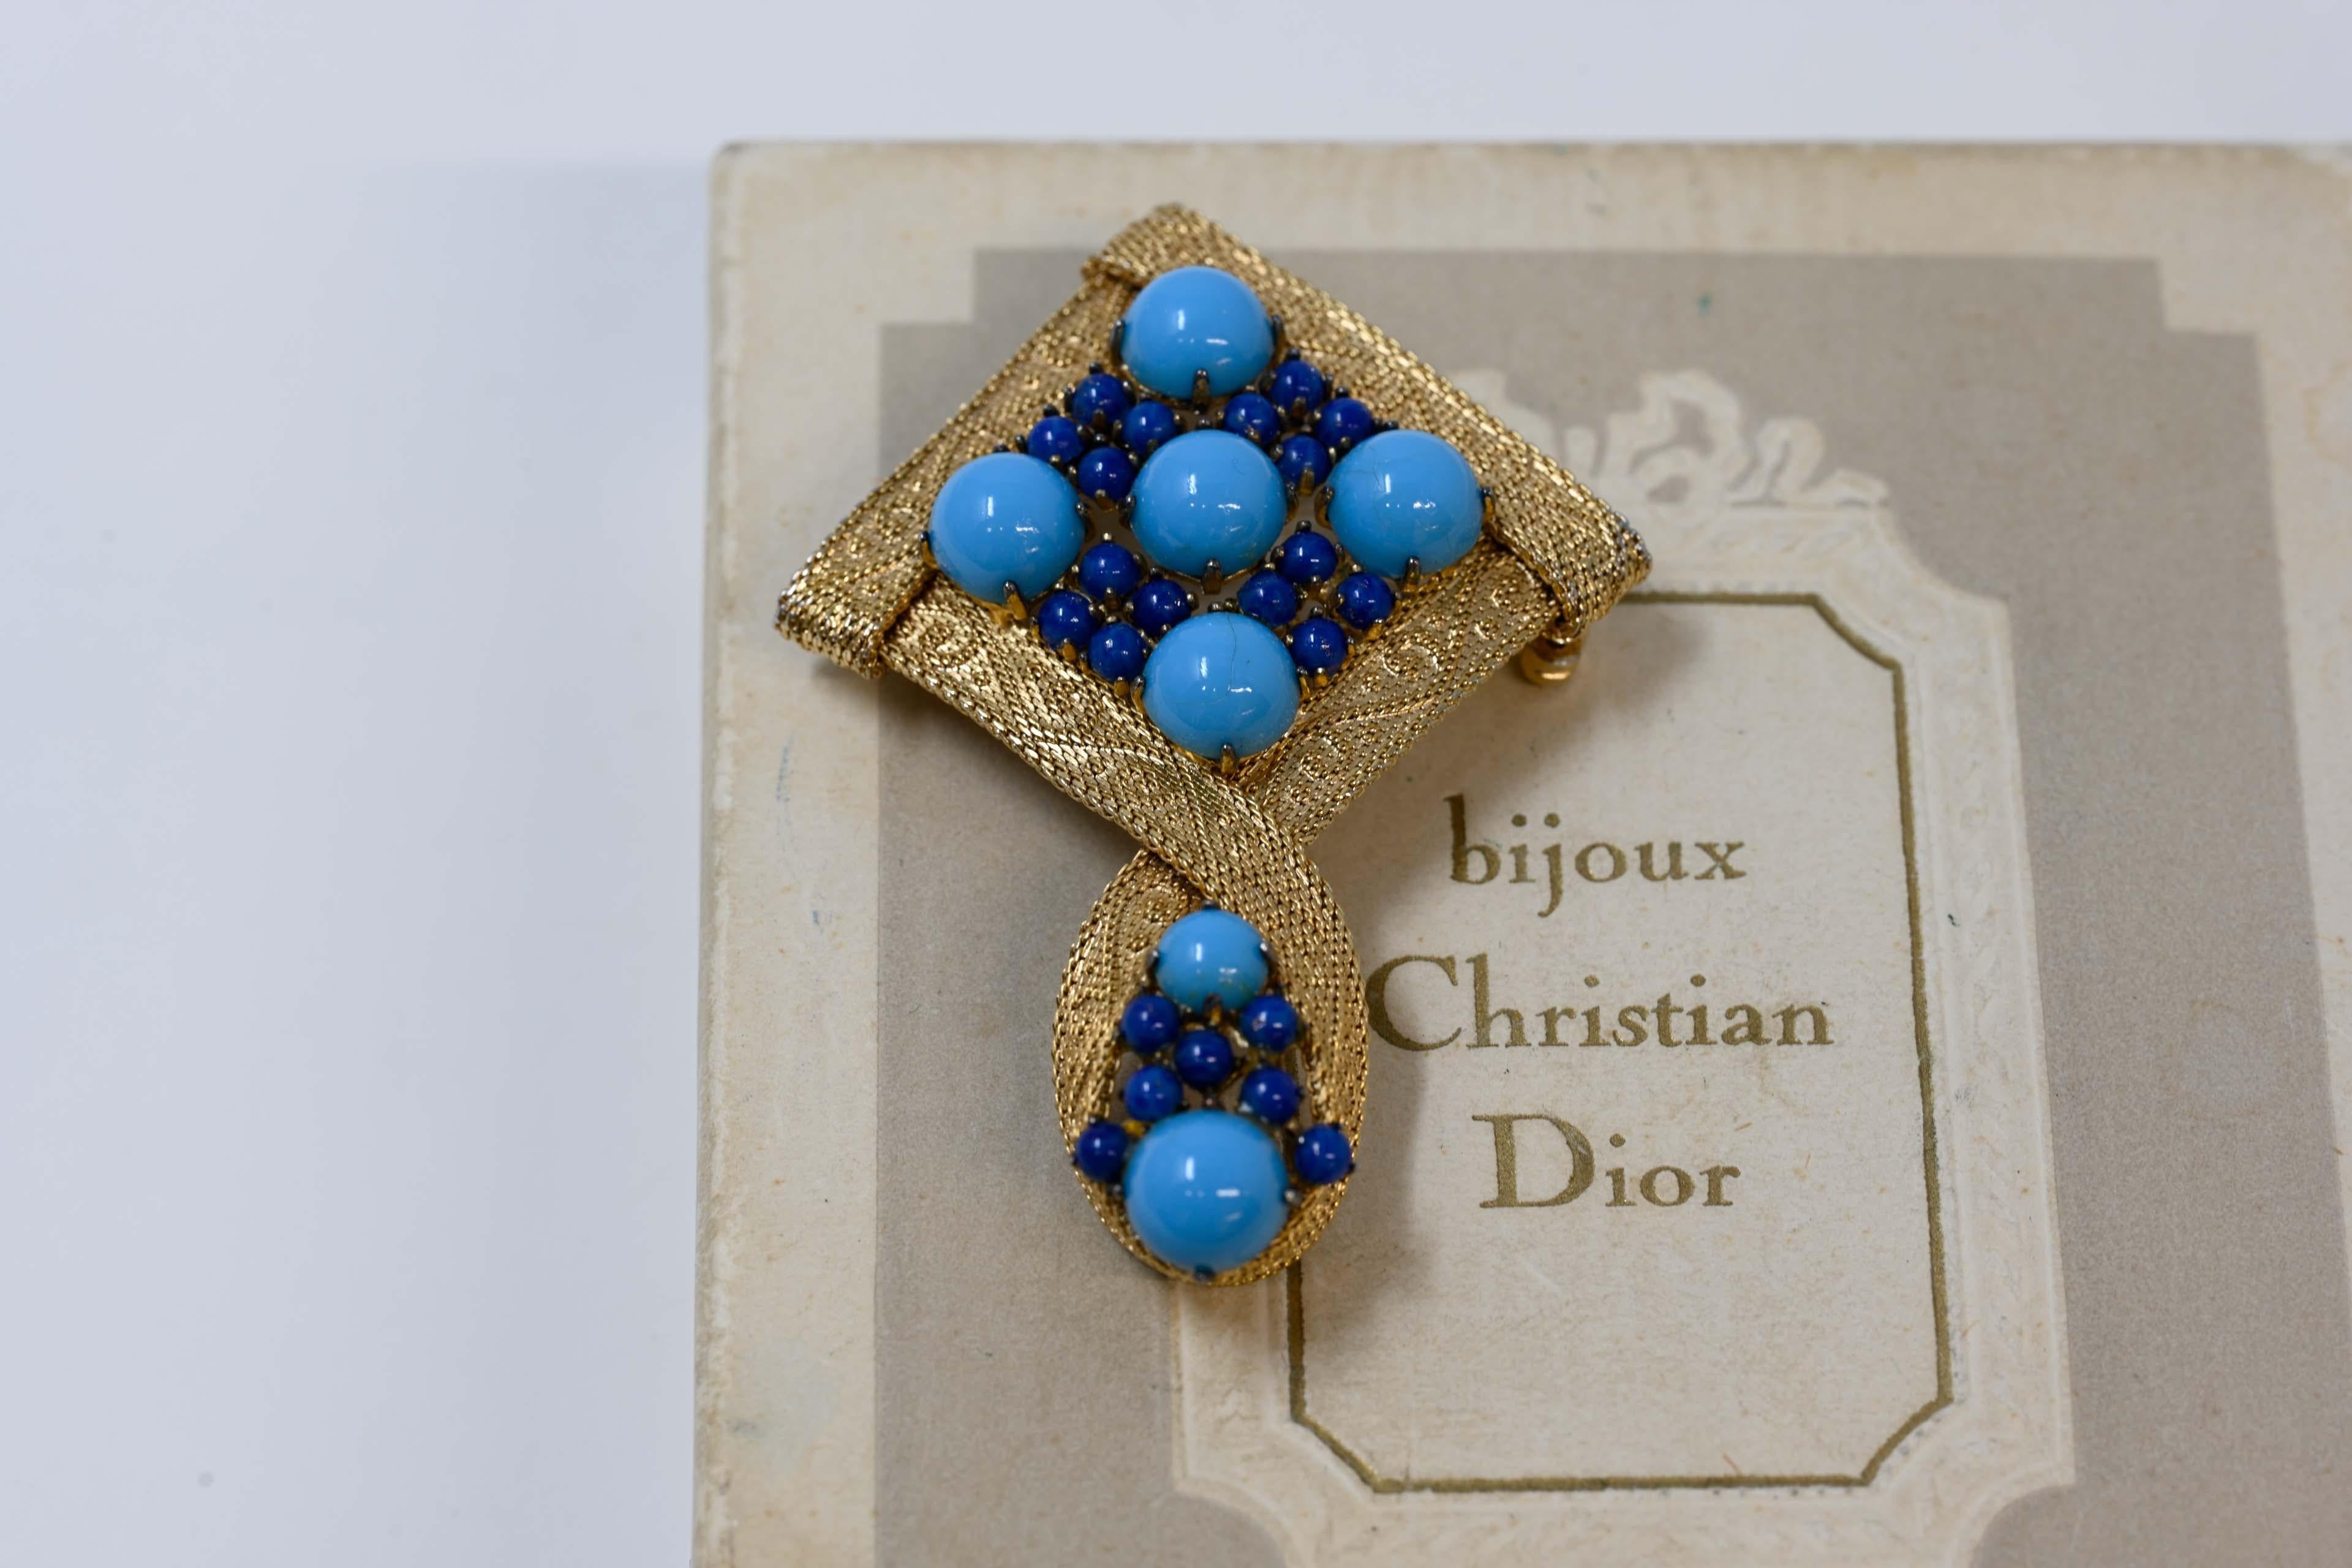 Christian Dior 1962 blue turquoise cabochon gold tone brooch and lapis lazuli cabochon stone. Marked on the back and dated. Made in Germany, measures 2 1/2 inches x 1 3/4 inches in excellent condition.